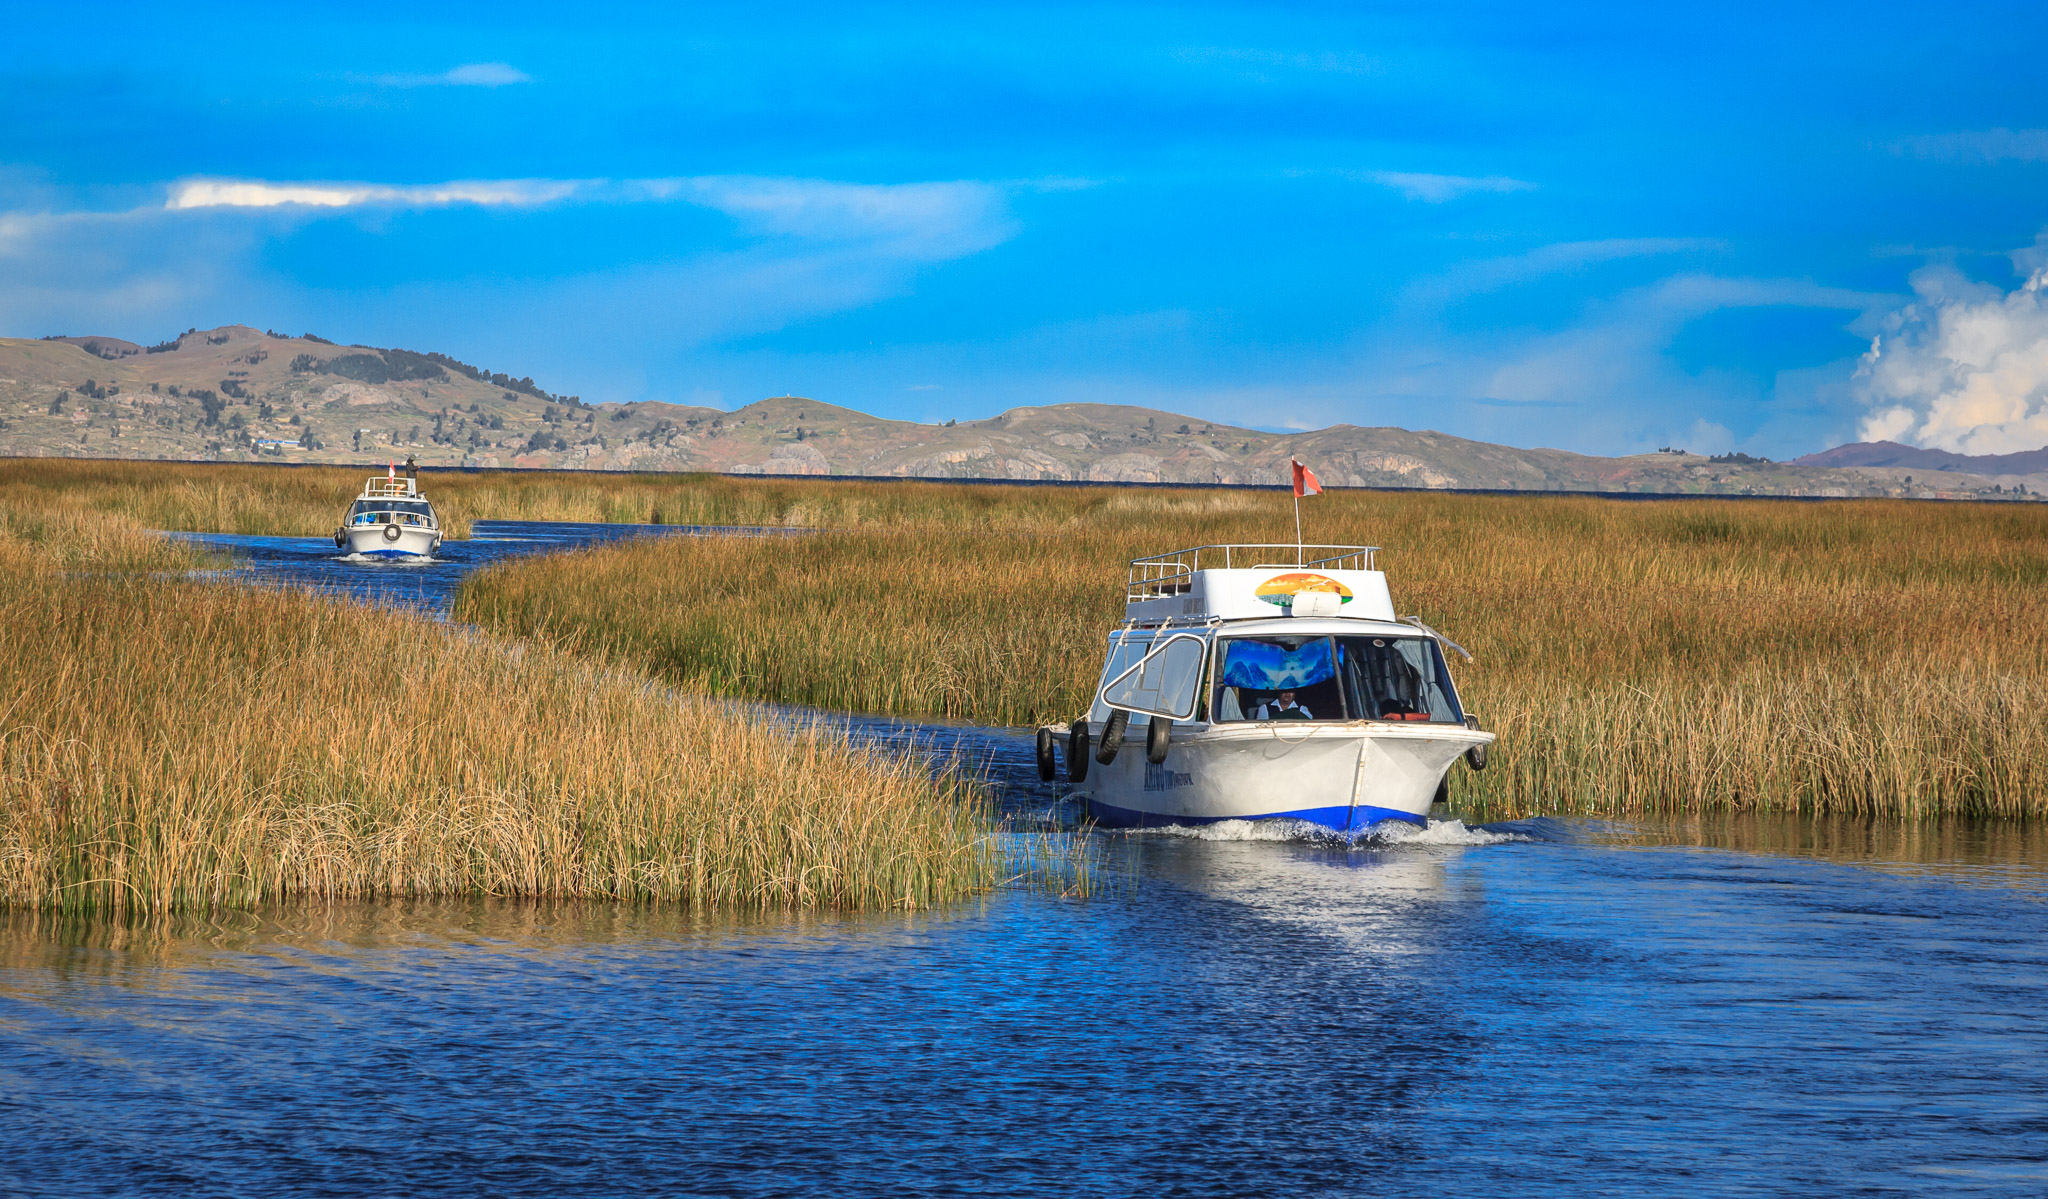 Returning to Puno through reed channels on Lake Titicaca